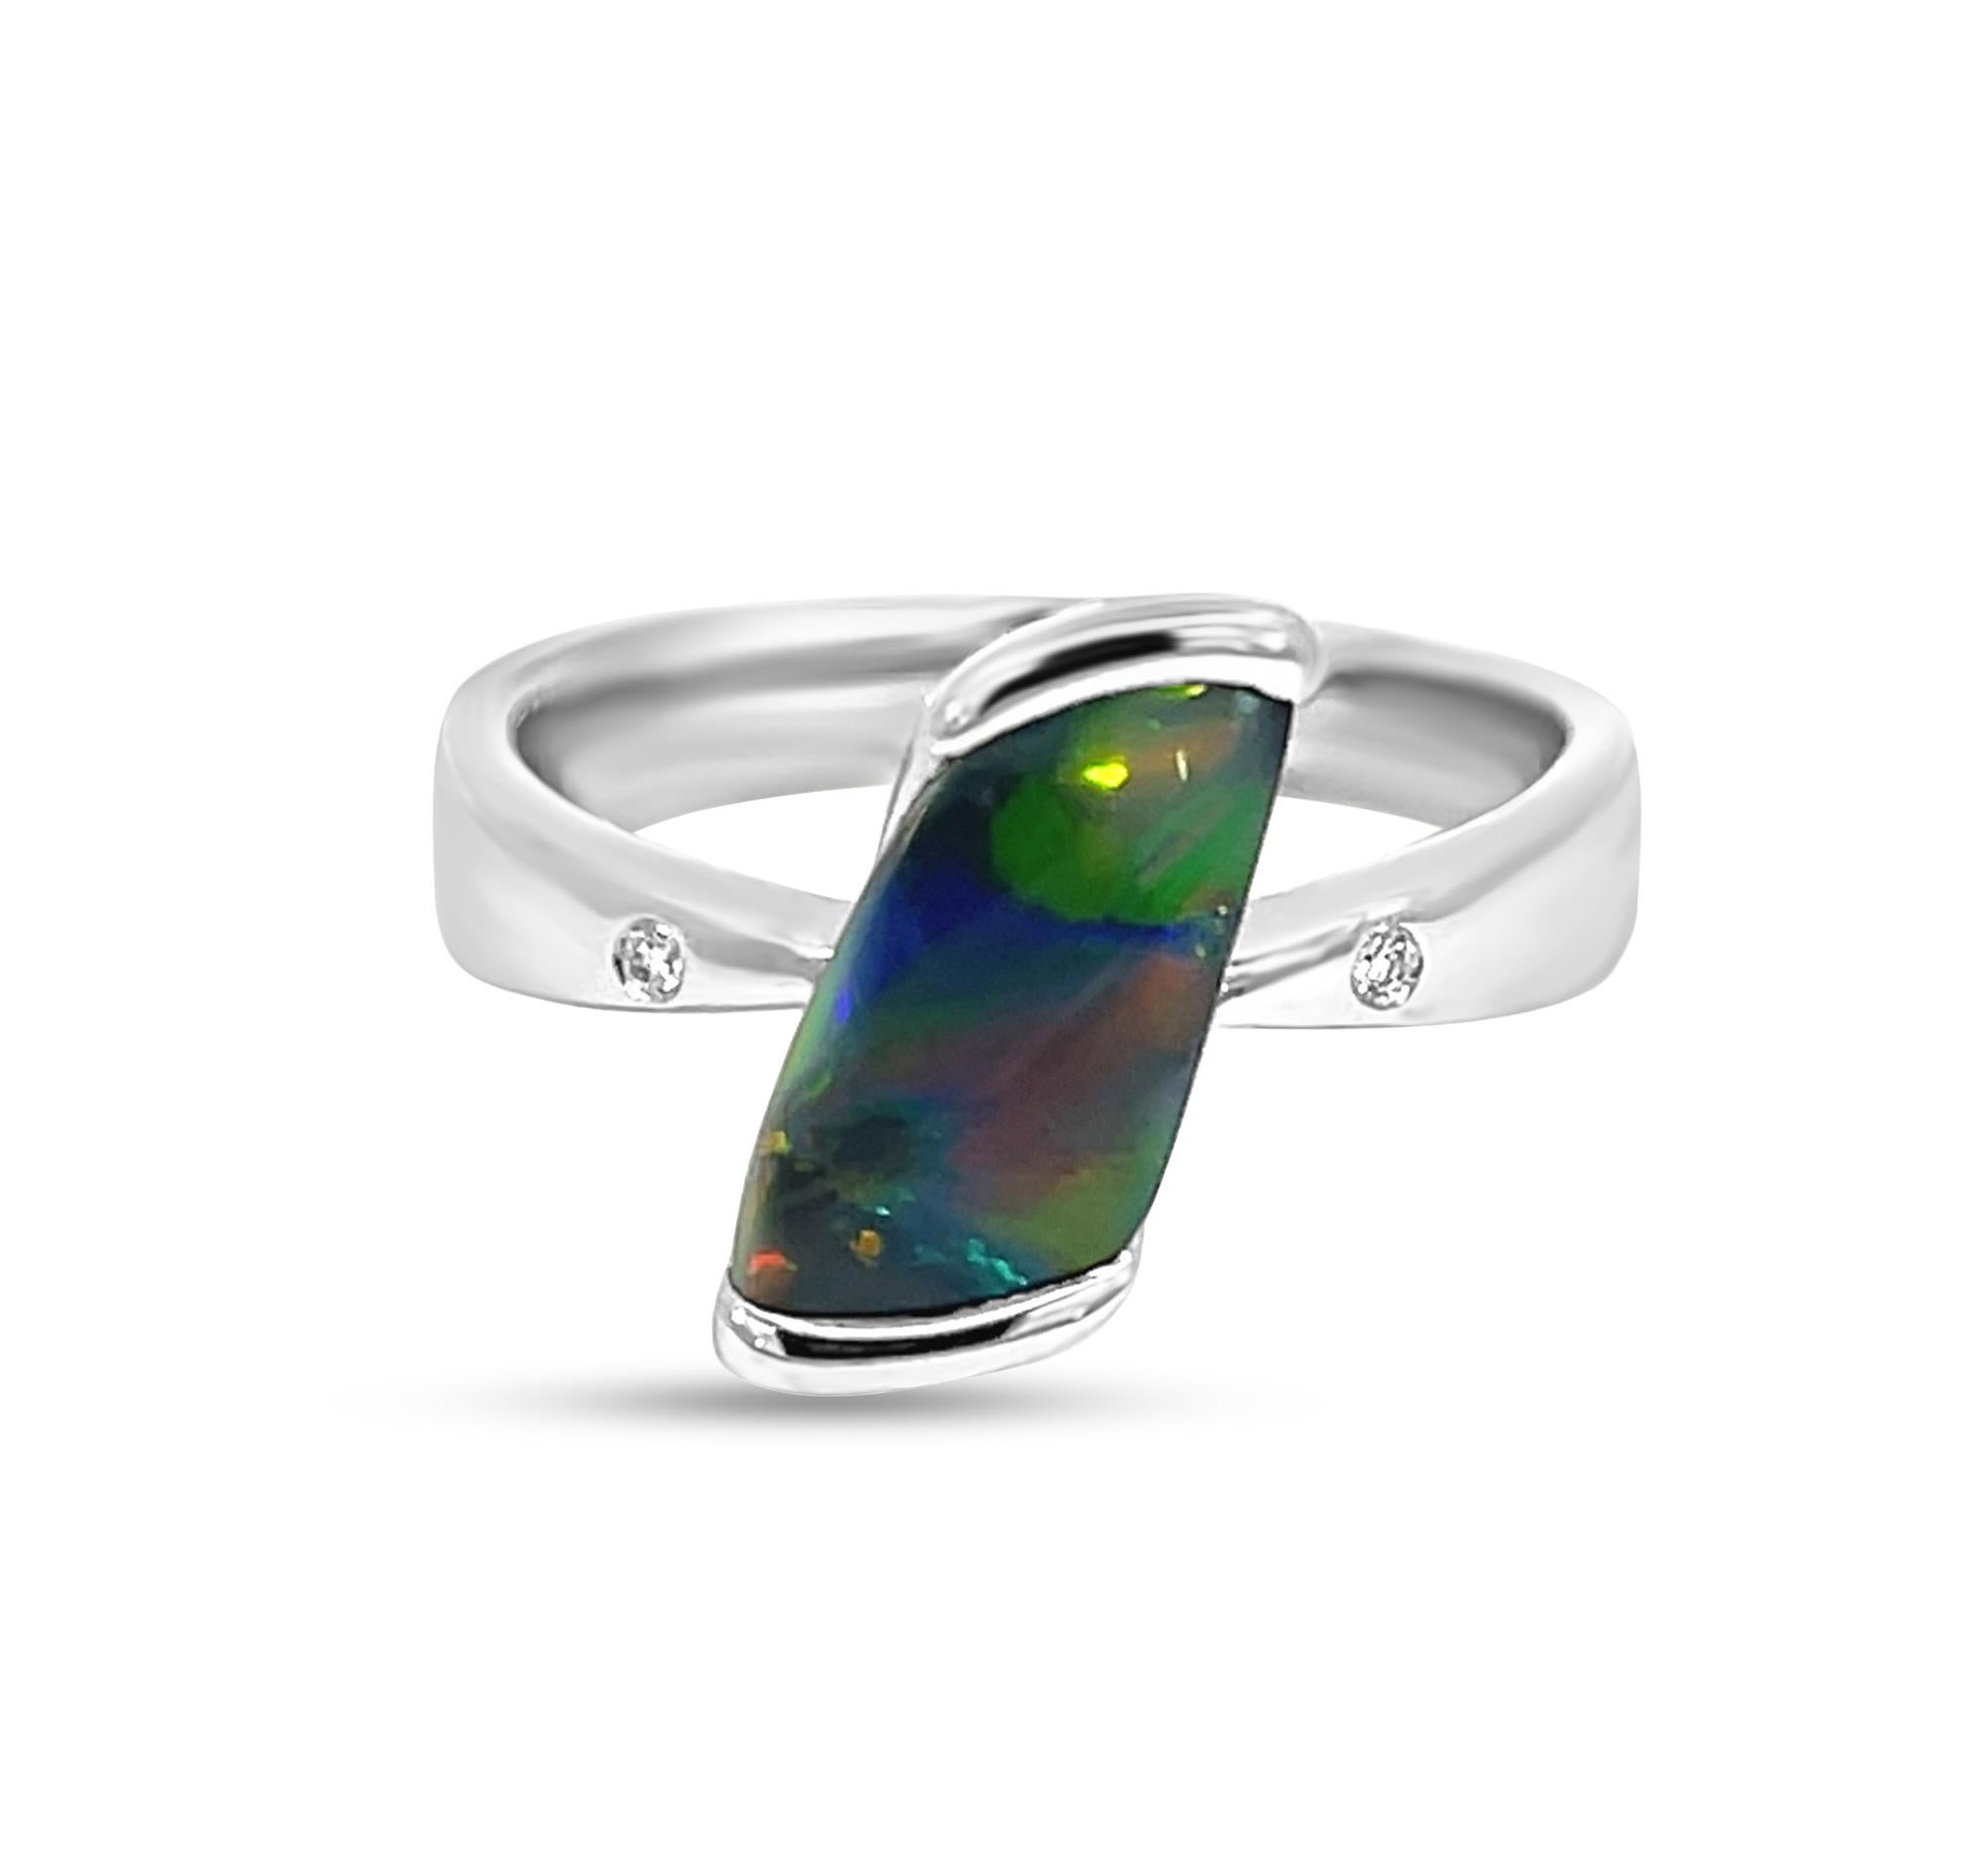 opal engagement rings meaning